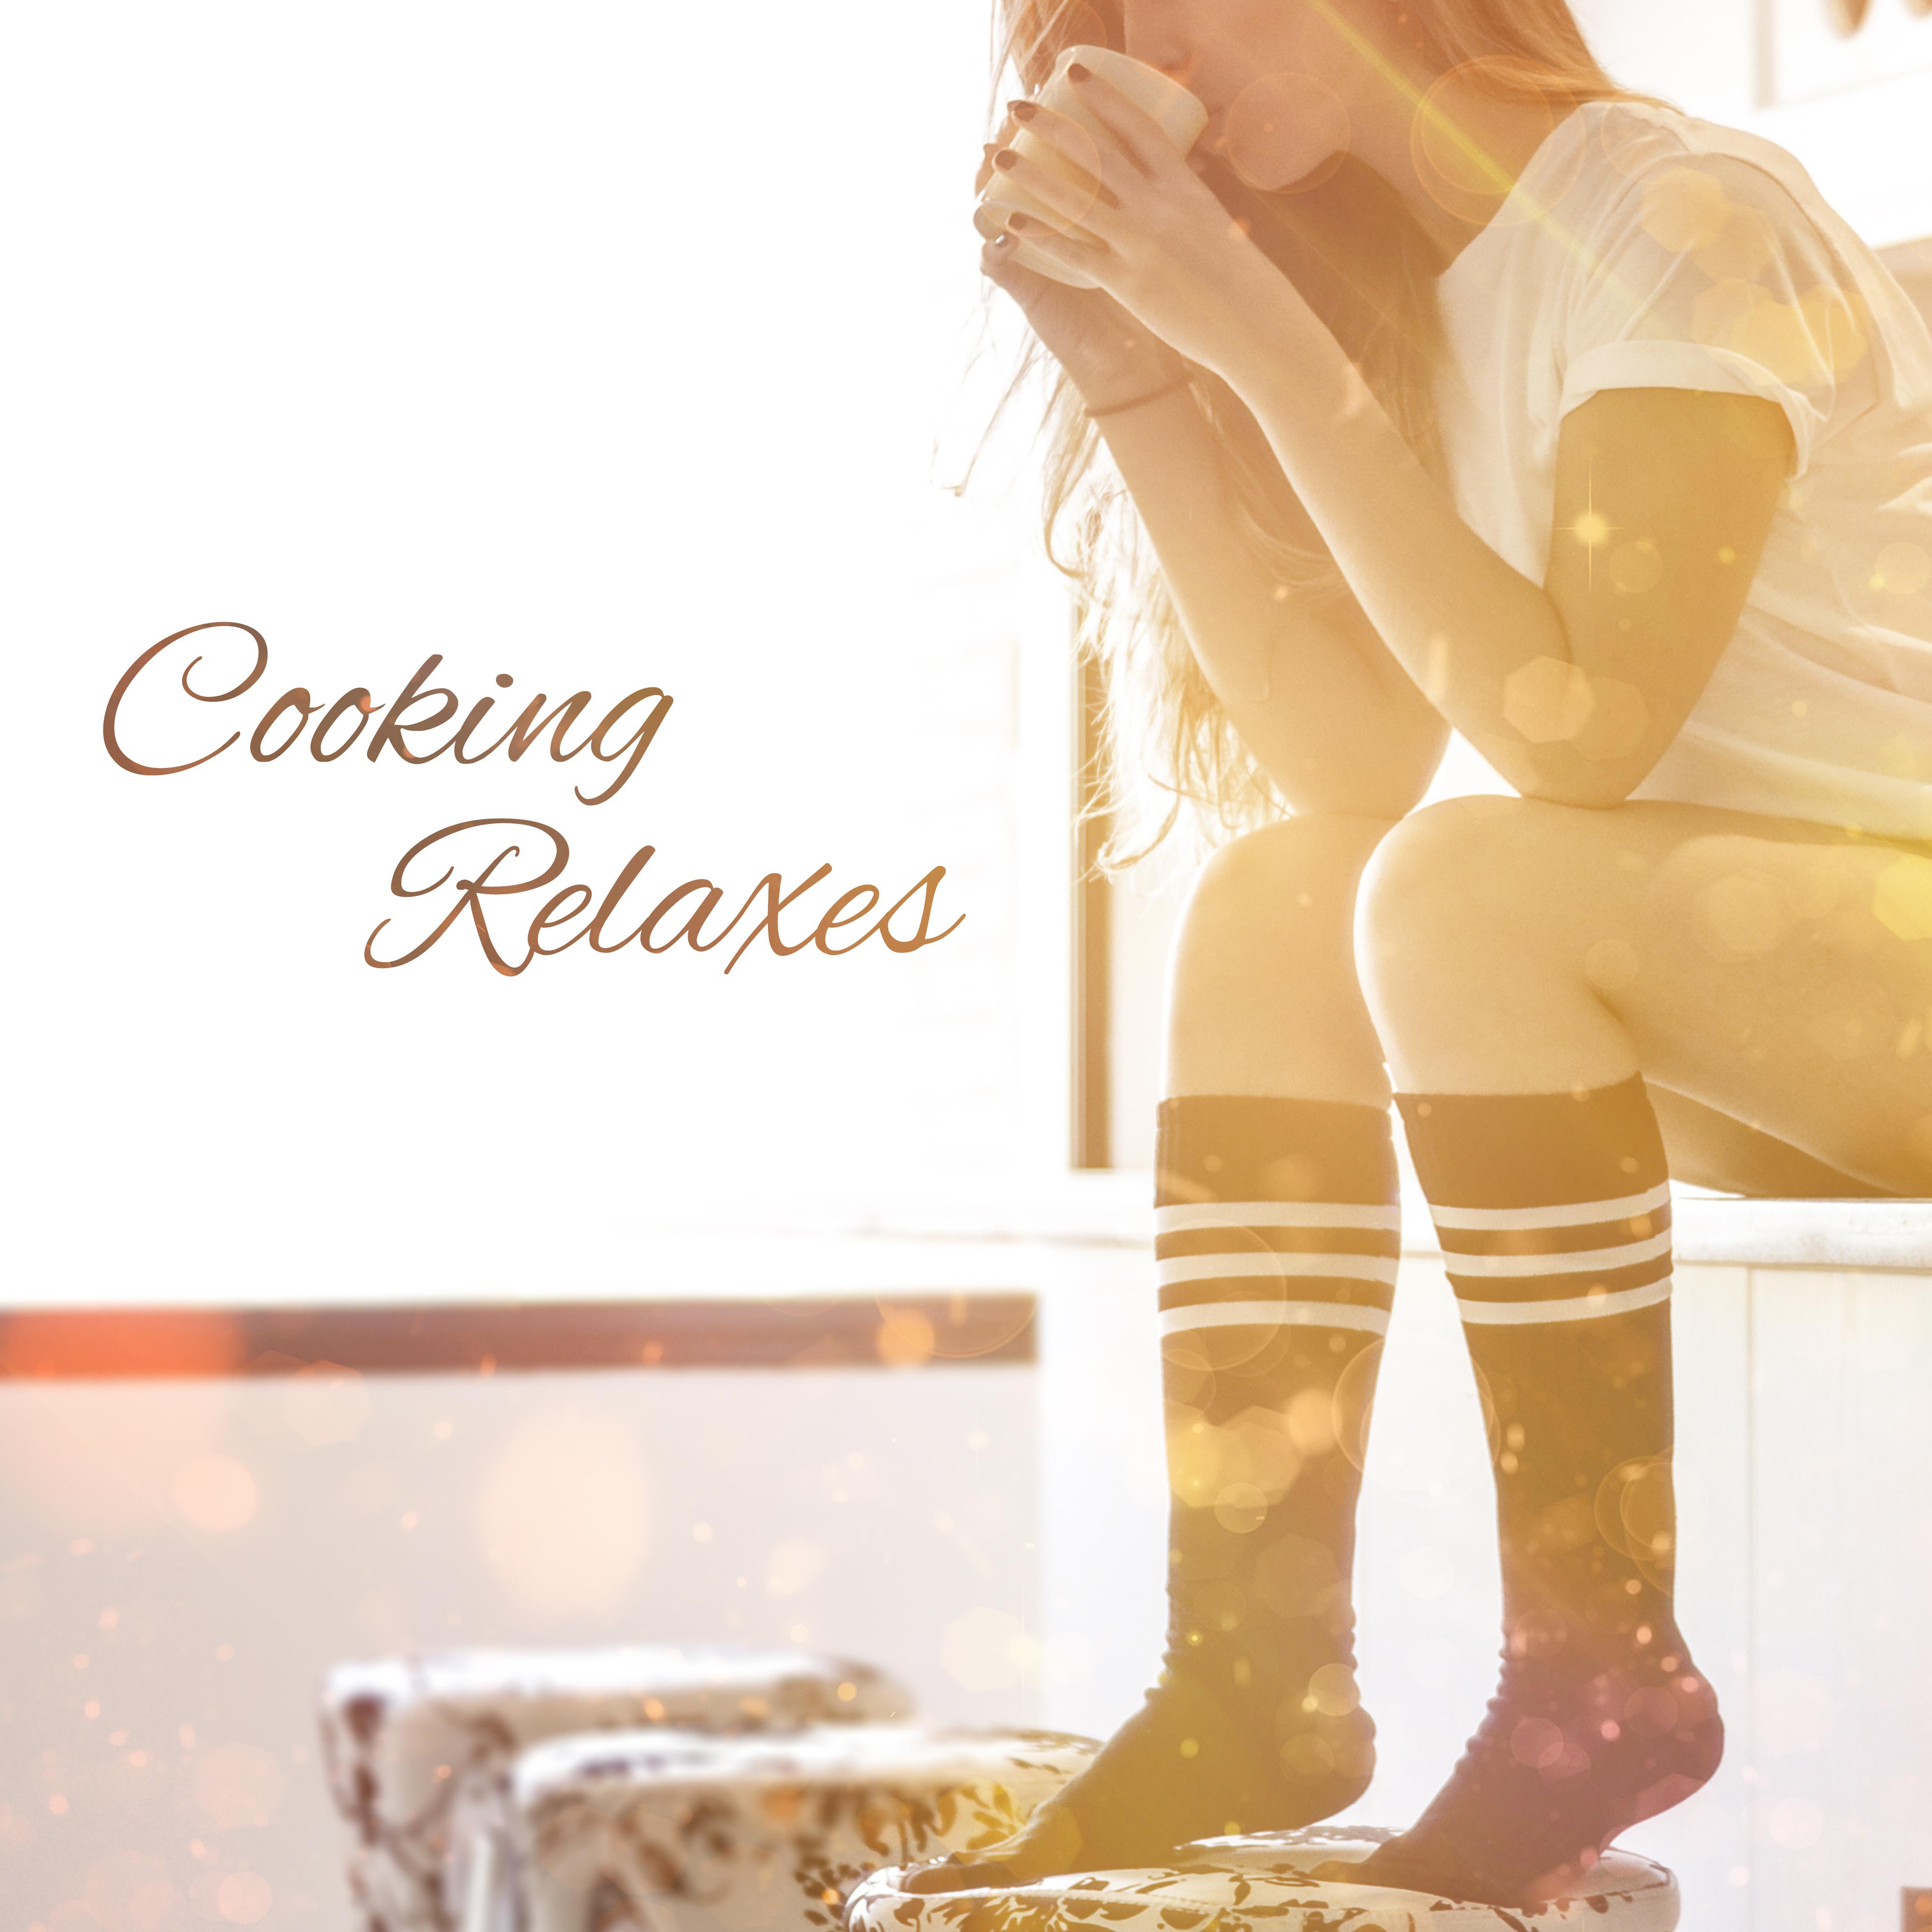 Cooking Relaxes - Jazz music Cooking, Master Chef, Kitchen Revolutions, Greatest Denmark, Jazz at Eating, Sounds Calm and Elegance